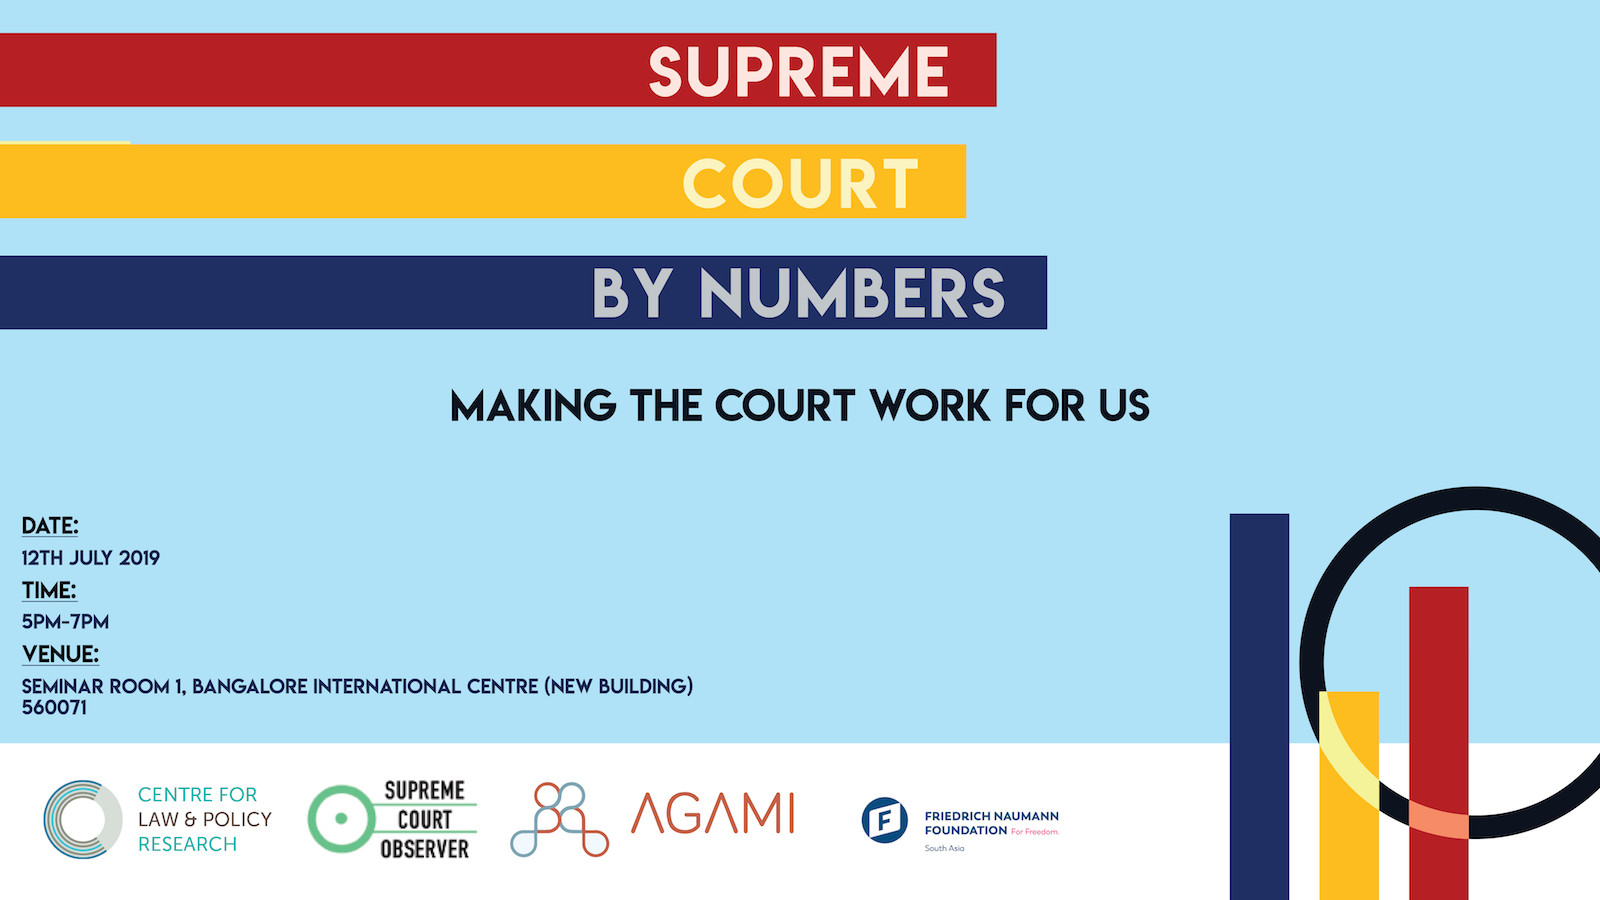 Supreme Court by Numbers: Making the Court Work for Us